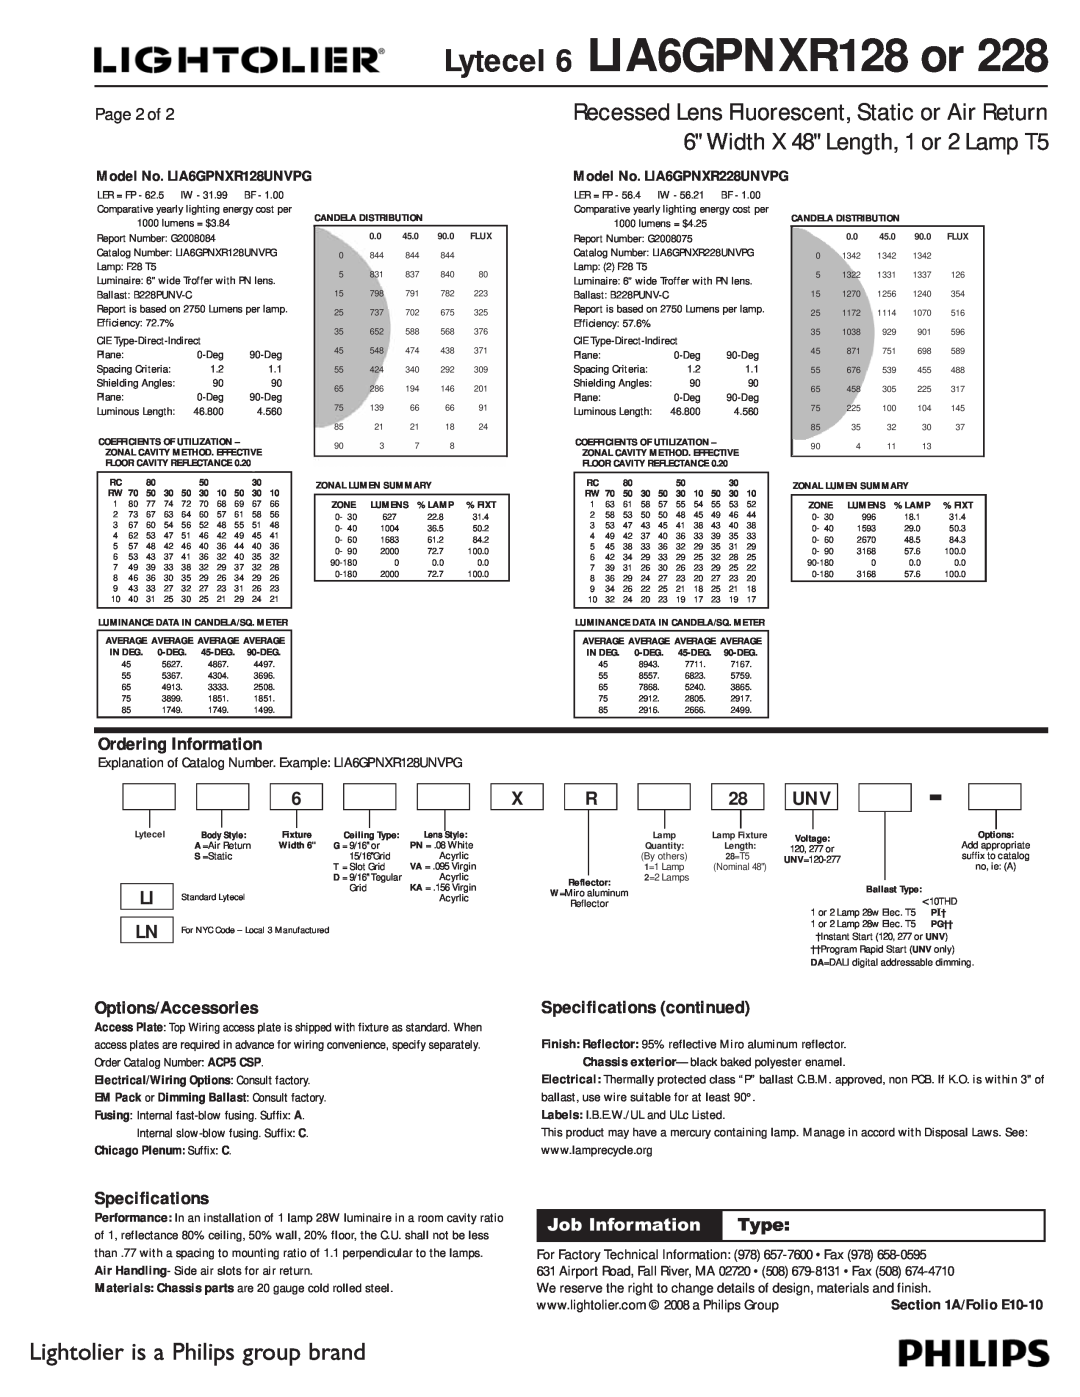 Lightolier LIA6GPNXR128 Ordering Information, Options/Accessories, Specifications continued, Page 2 of, A/Folio E10-10 